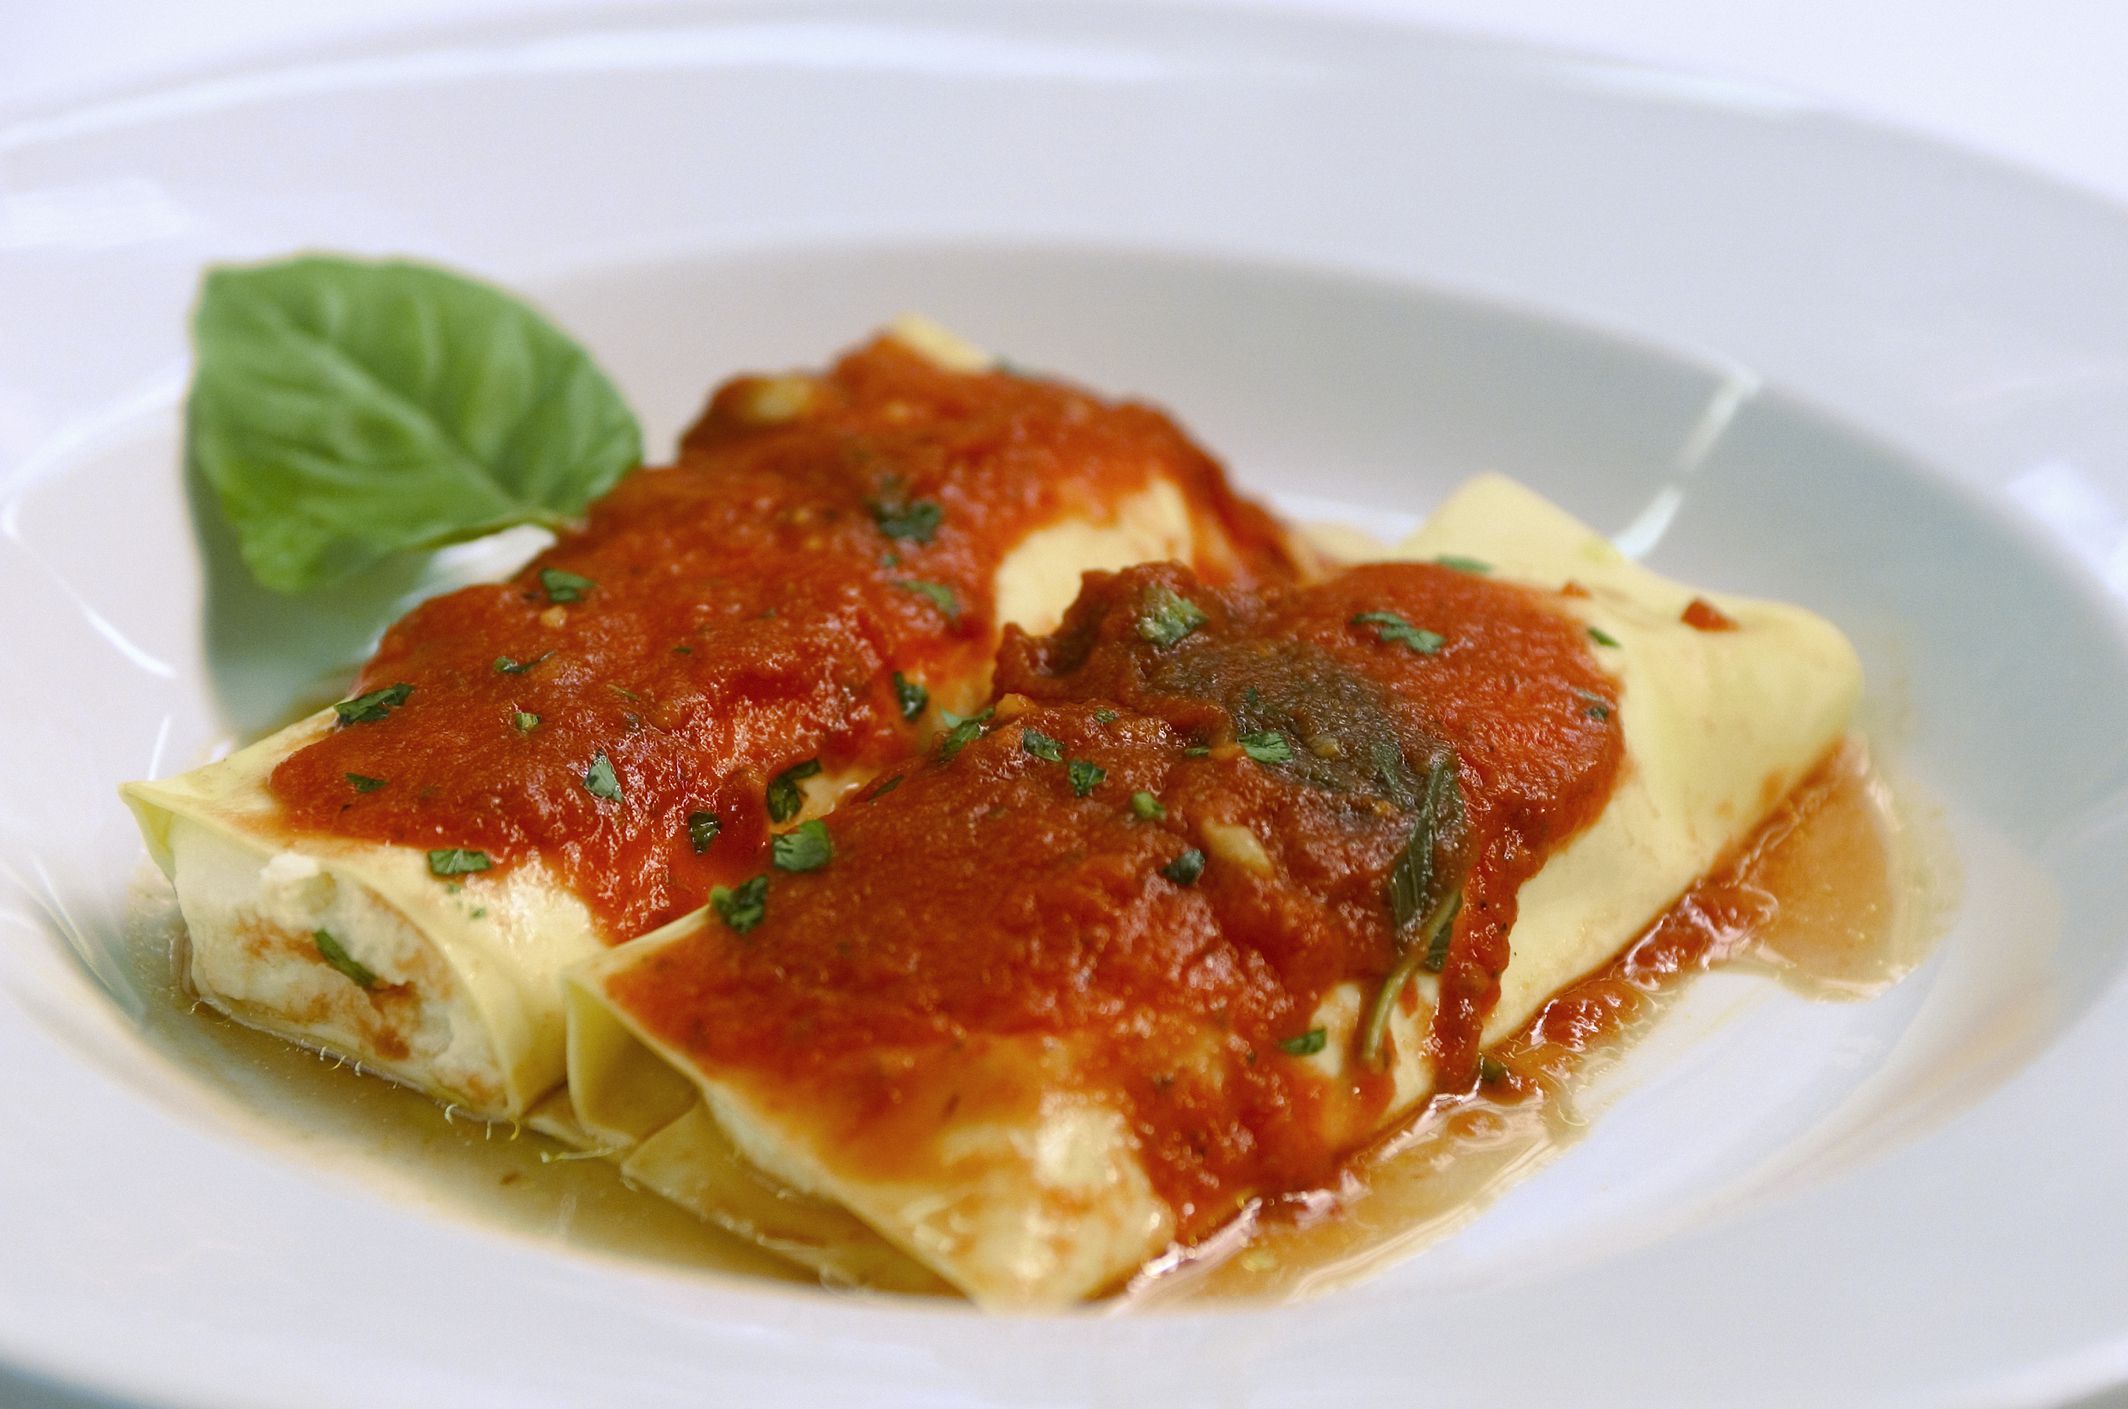 About Cannelloni and Manicotti